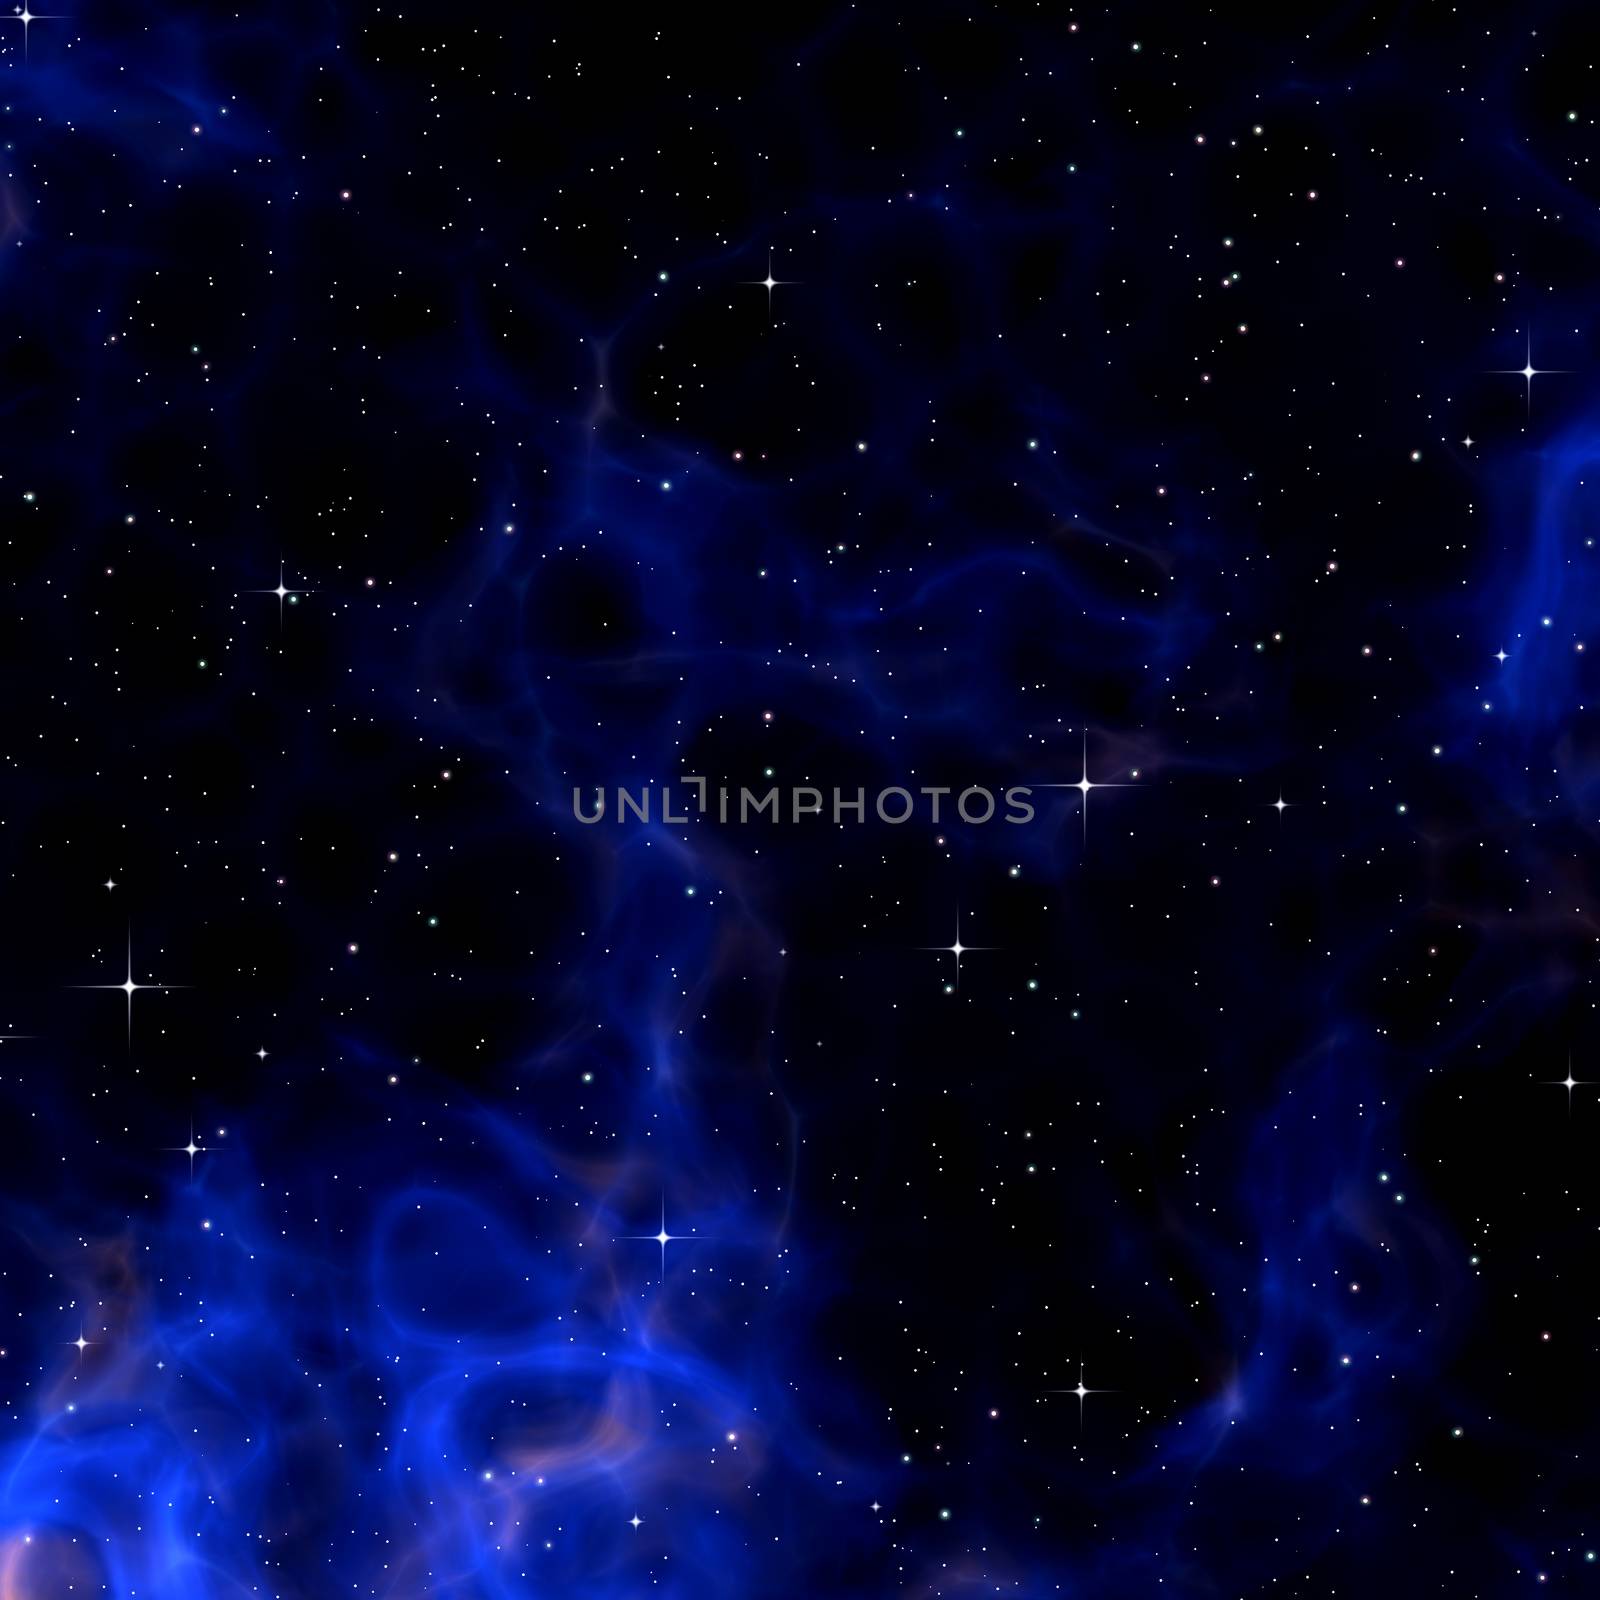 Illustration of a seamless sky by night with lots of stars